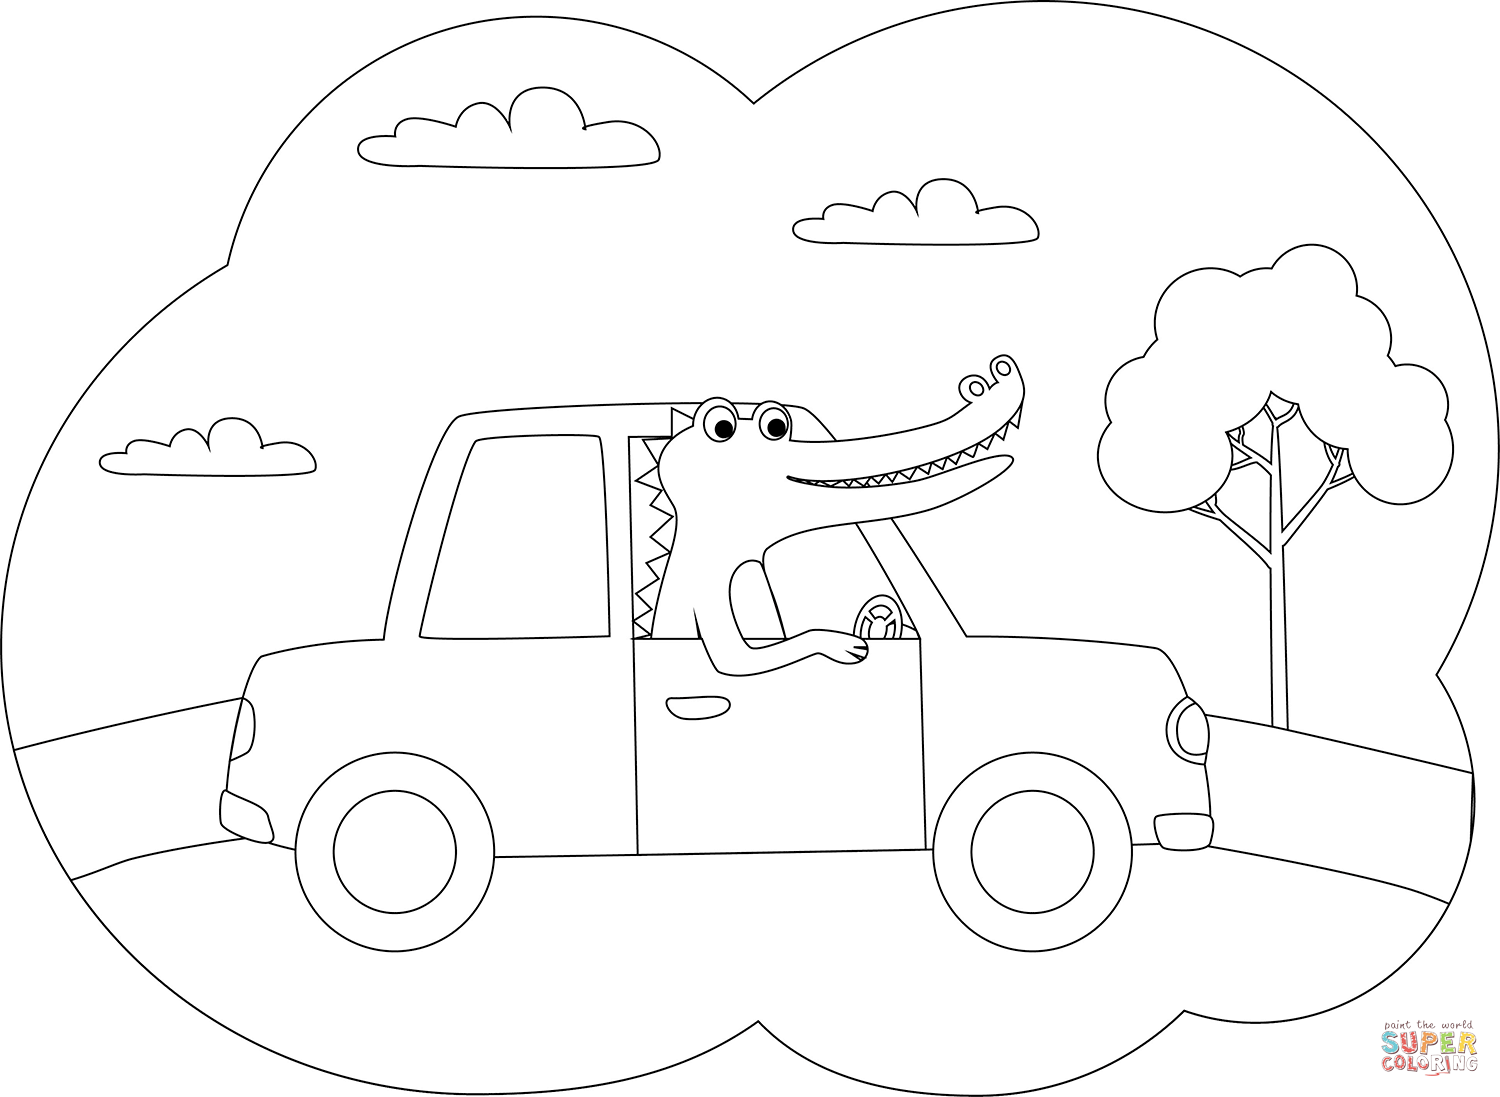 Crocodile Driving a Car coloring page | Free Printable Coloring Pages